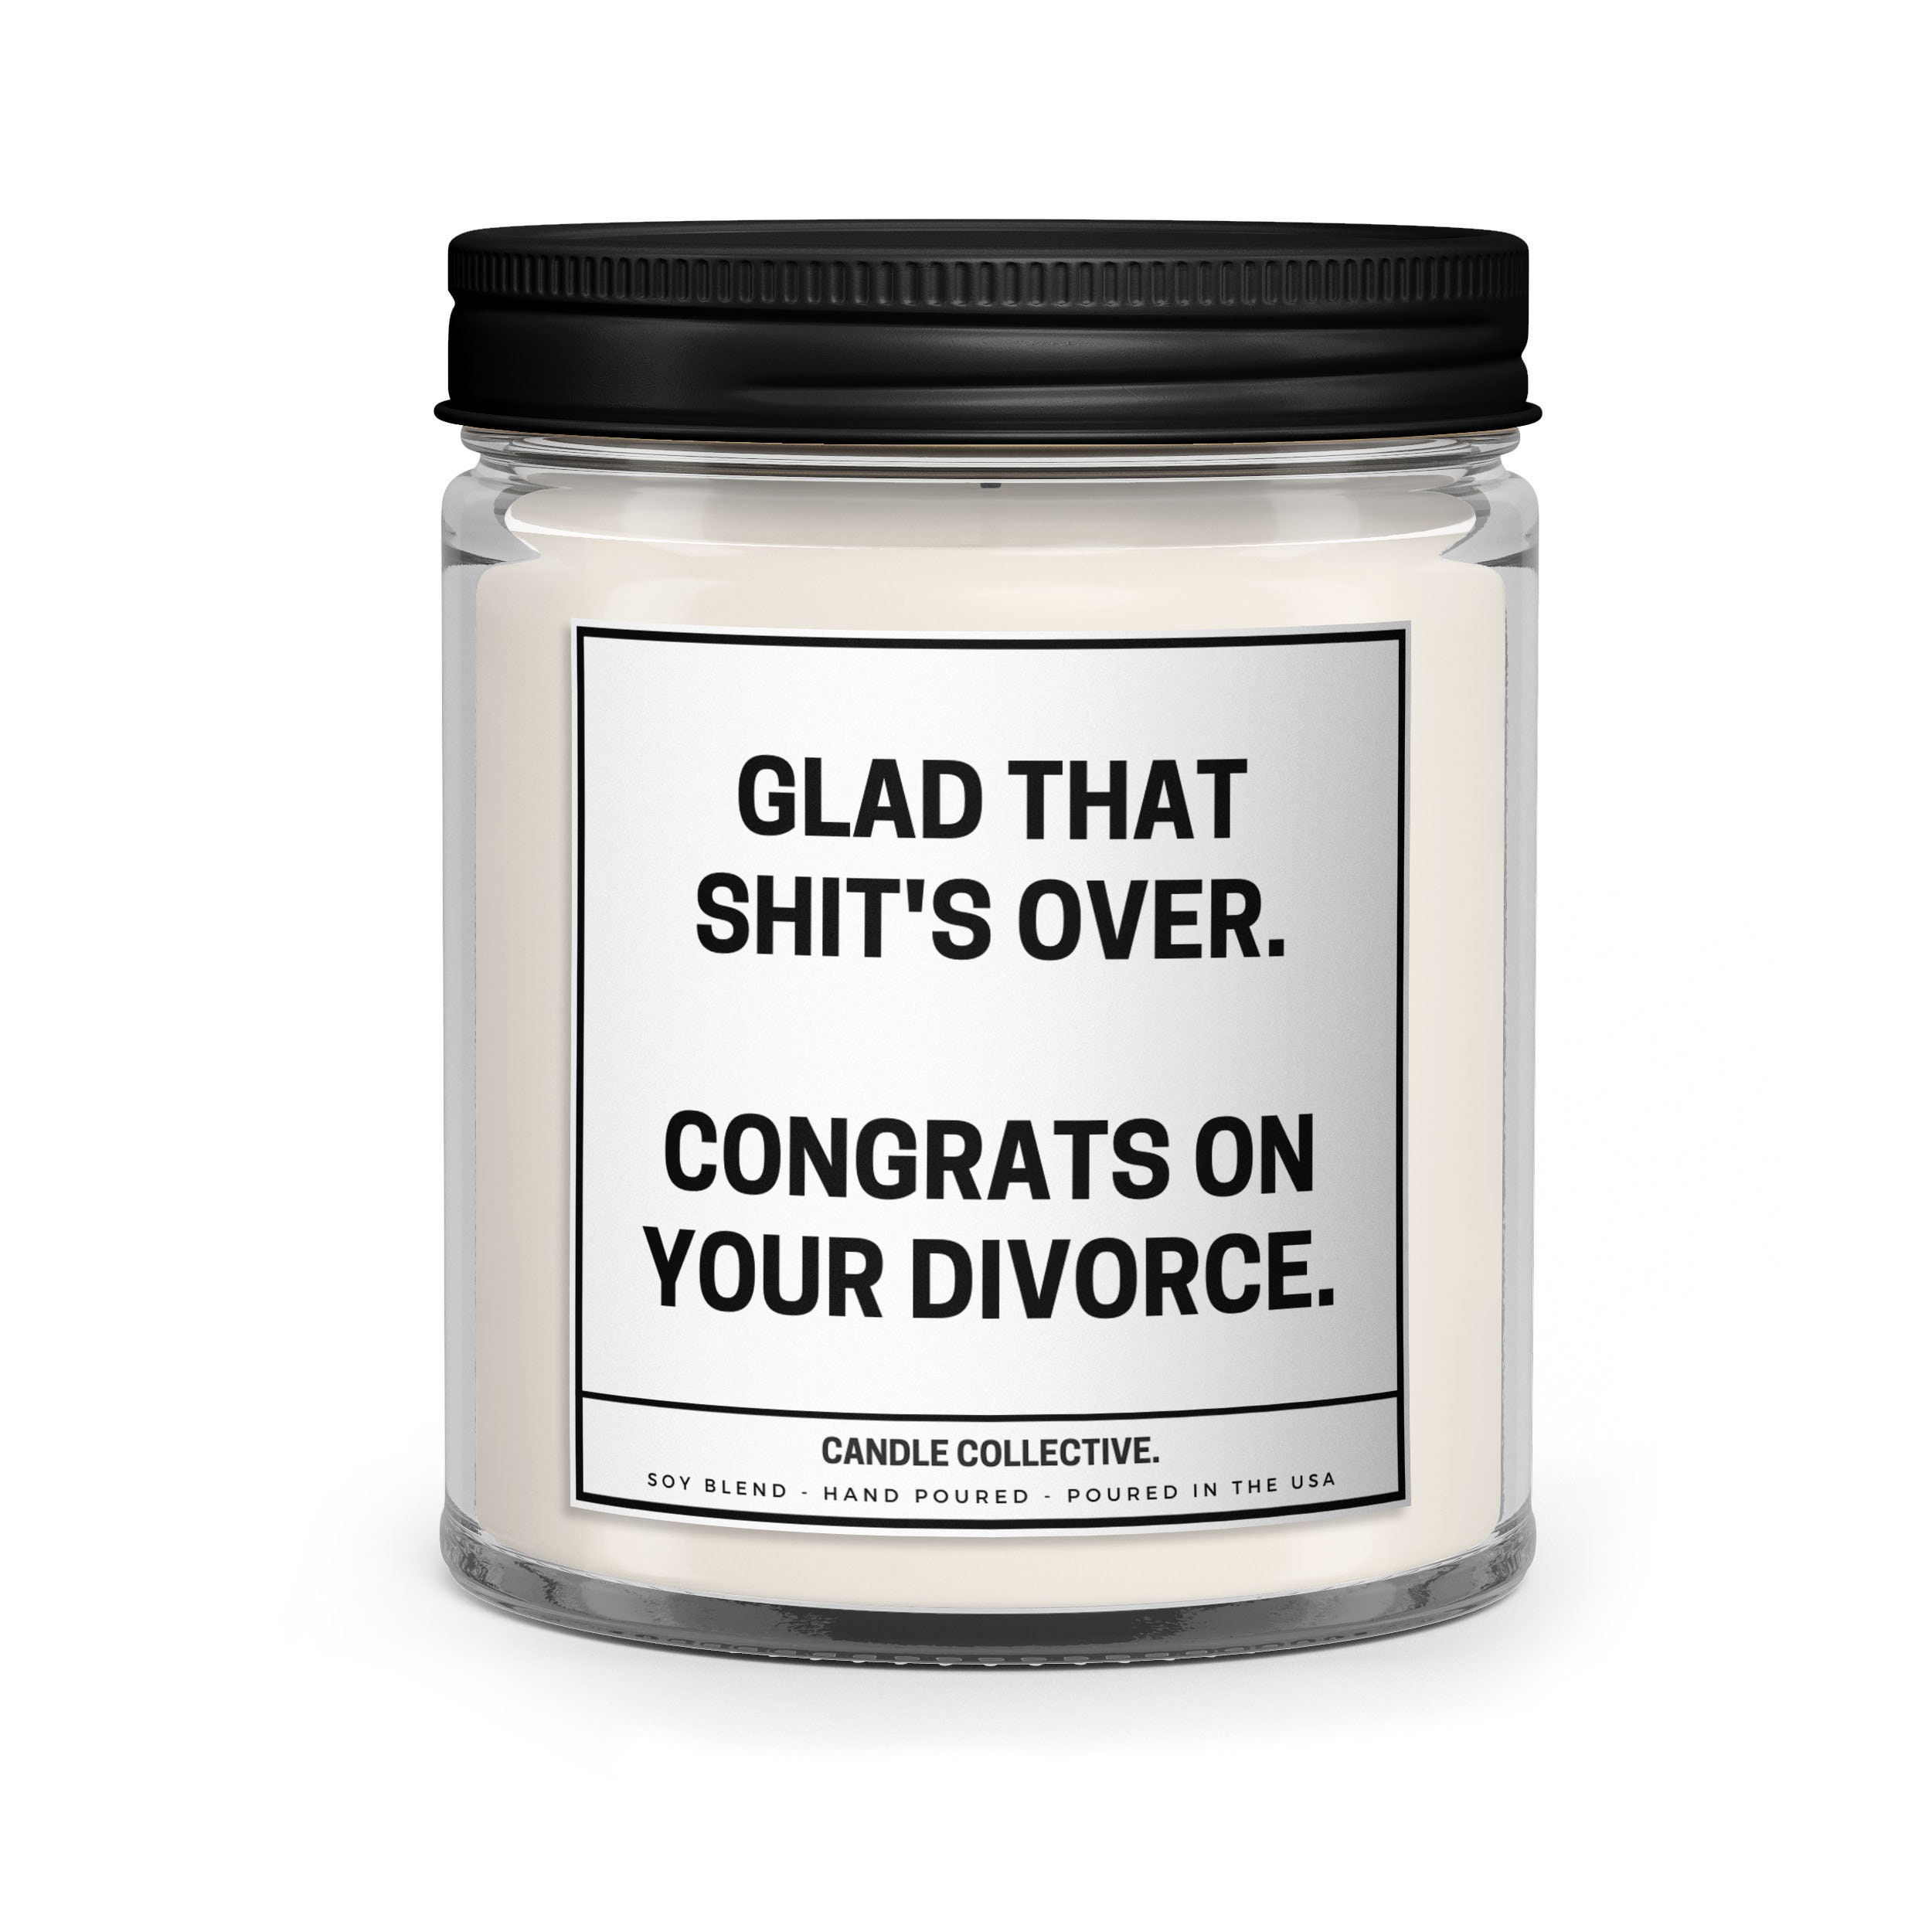 Congrat on Your Divorce Soy Candle